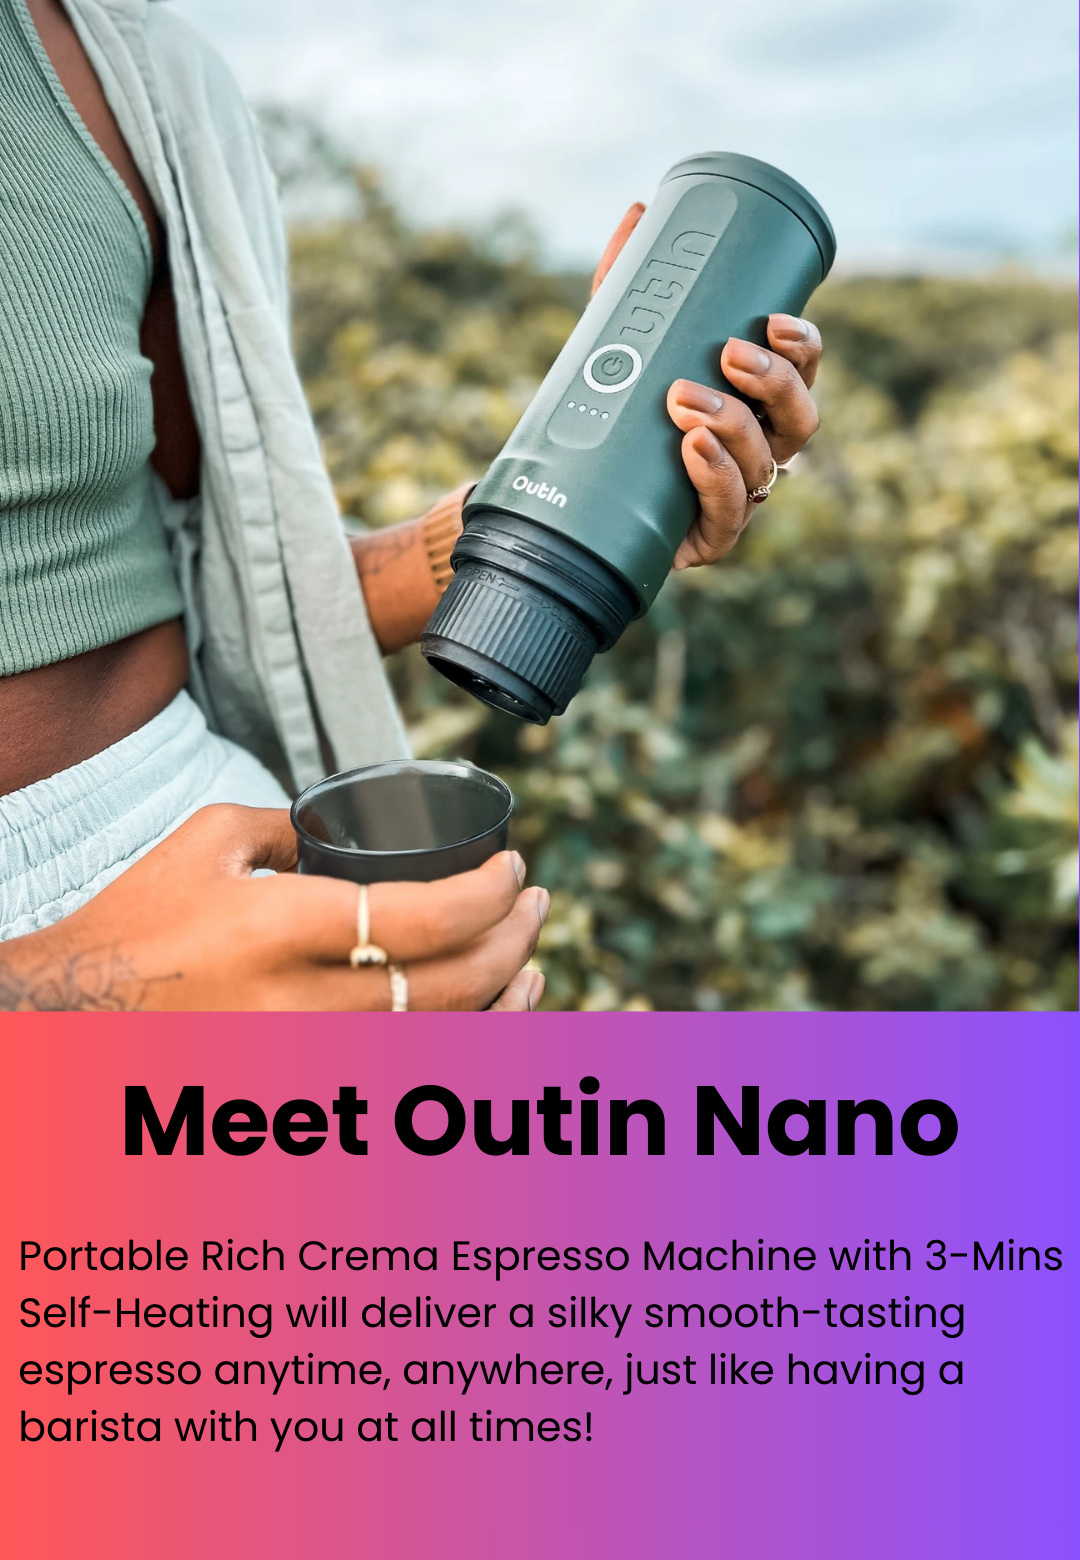 Portable Rich Crema Espresso Machine with 3-Mins Self-Heating will deliver a silky smooth-tasting espresso anytime, anywhere, just like having a barista with you at all times!